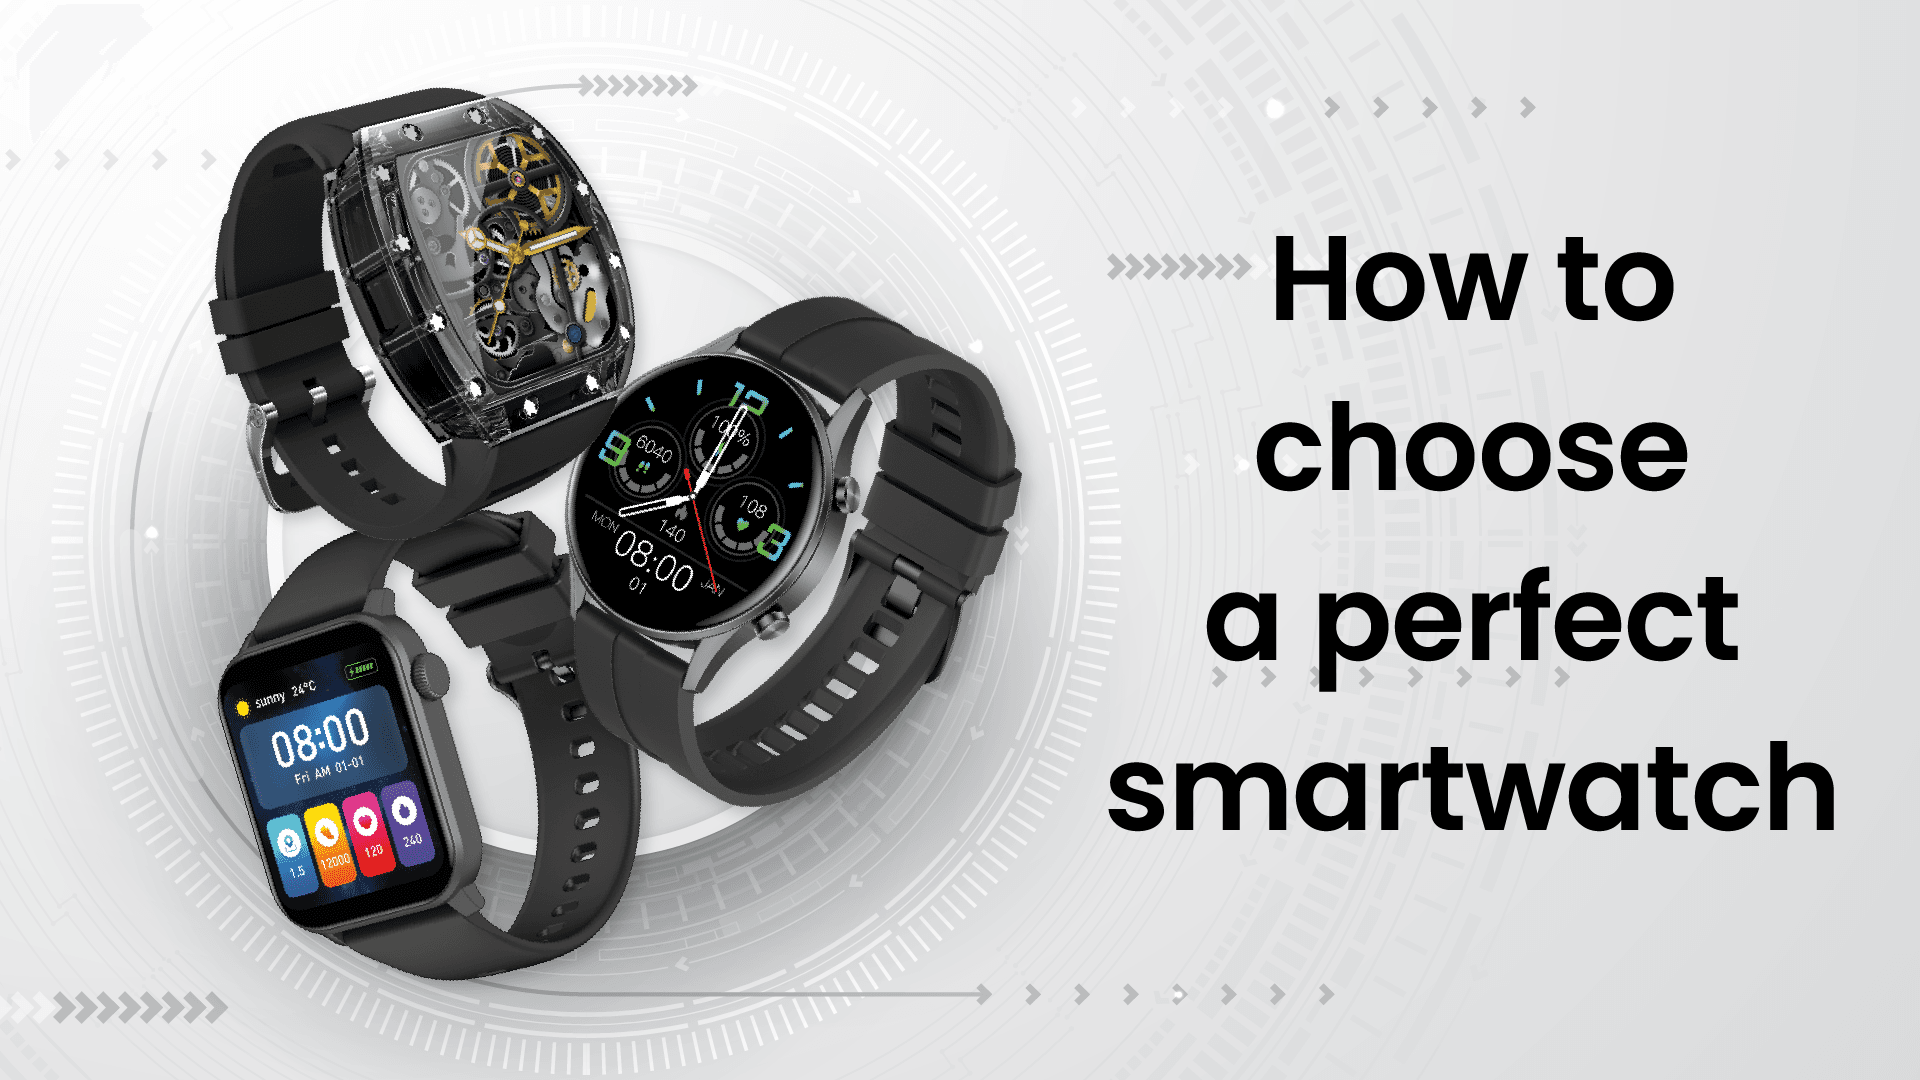 Smartwatch Buying Guide: How to Choose the Perfect Companion for Your Wrist - A Comprehensive Overview